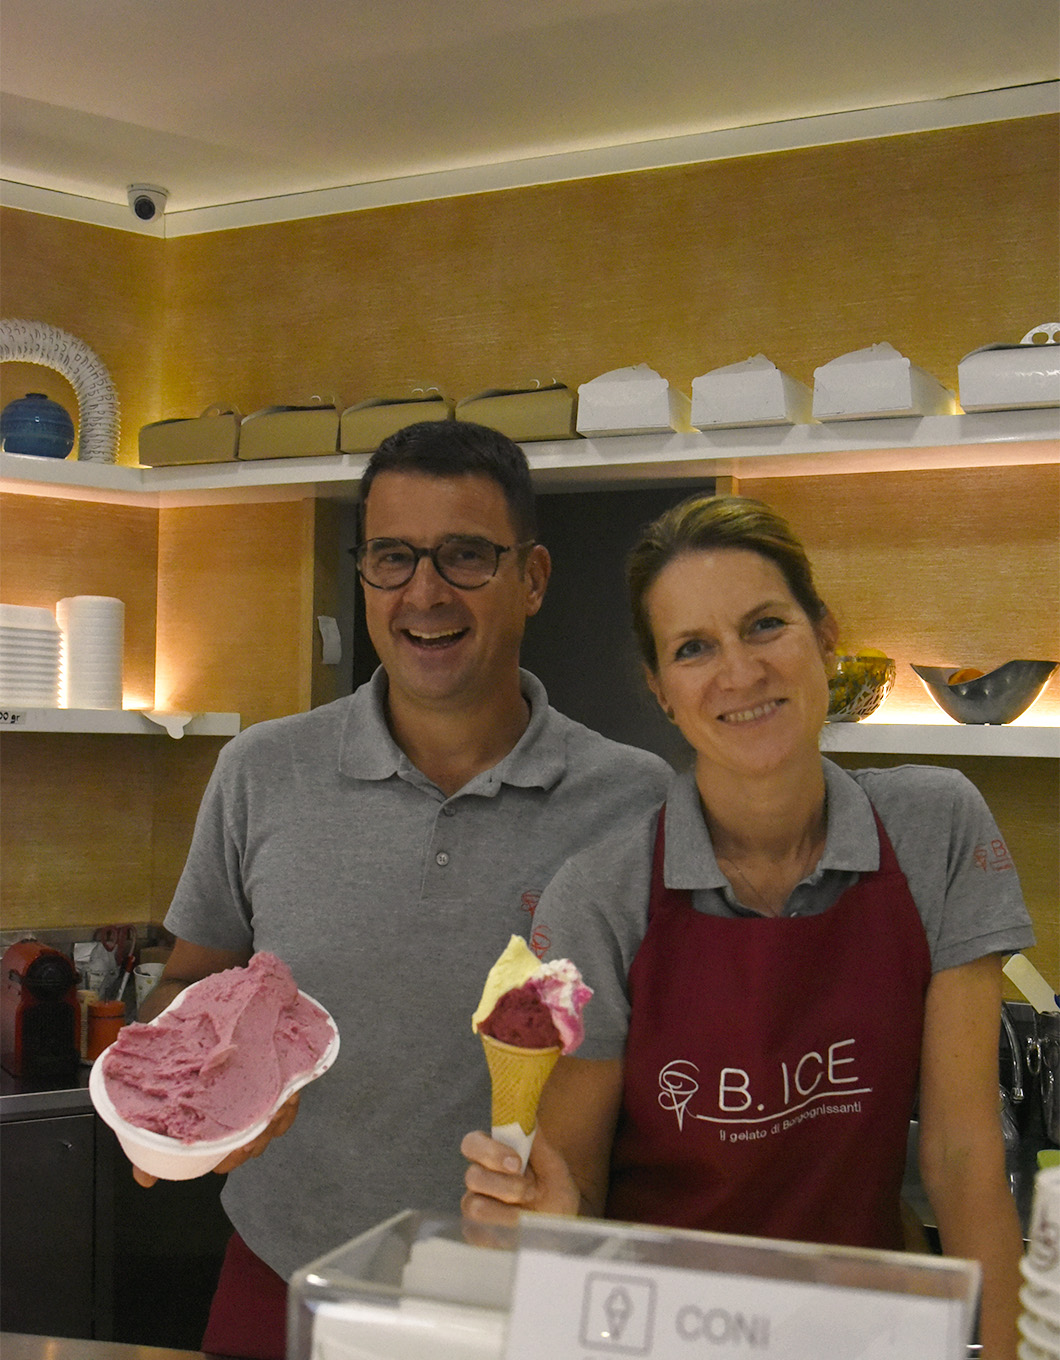 The couple, Aldo and Cristina, pouring gelato for clients at their gelateria B.ICE in Florence